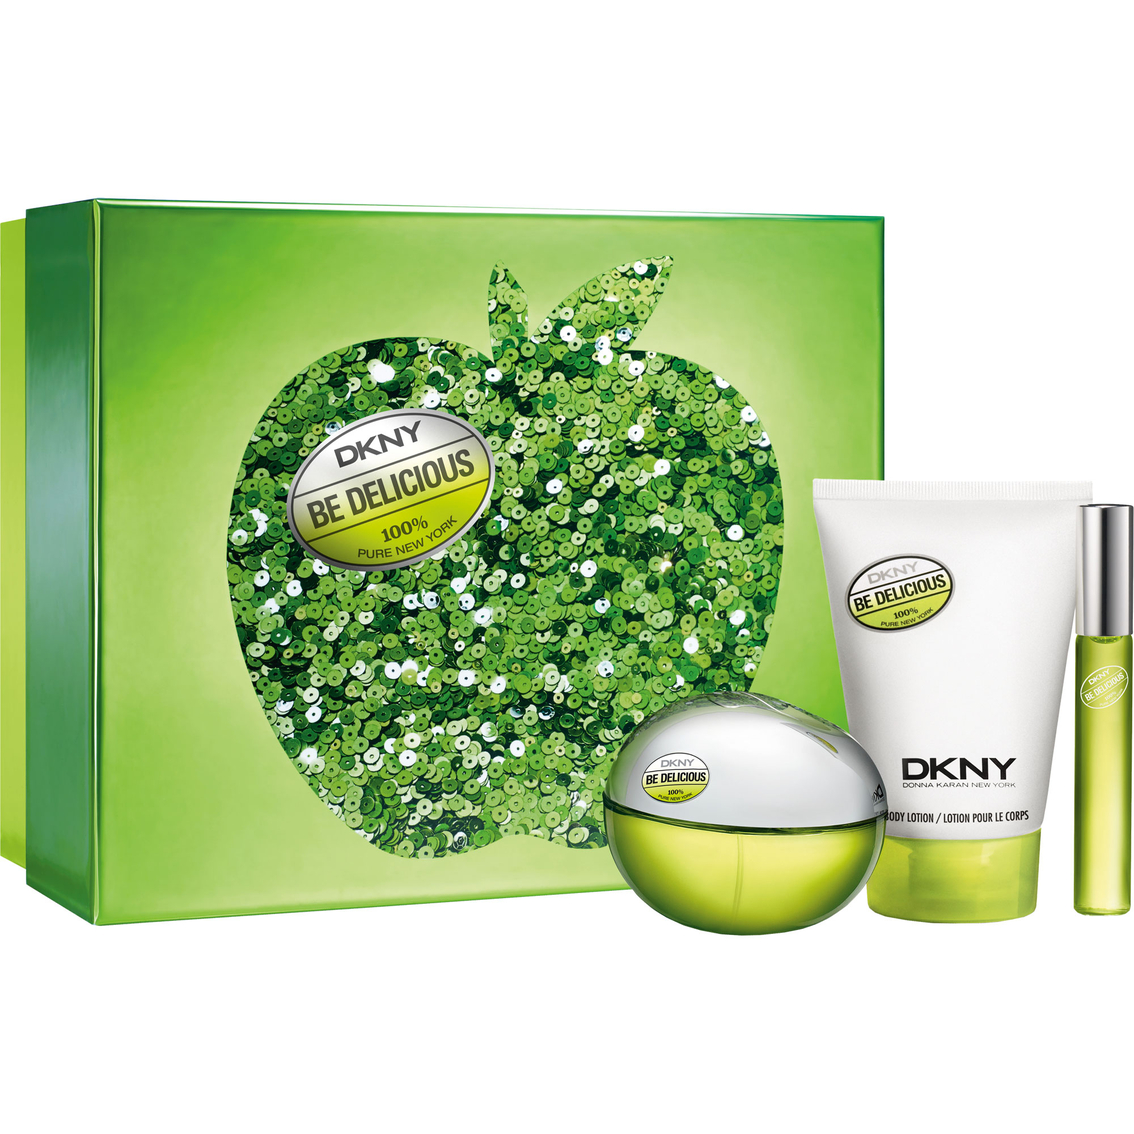 Dkny By Donna Karan Be Delicious Greetings 3 Pc. Gift Set | Gifts Sets ...